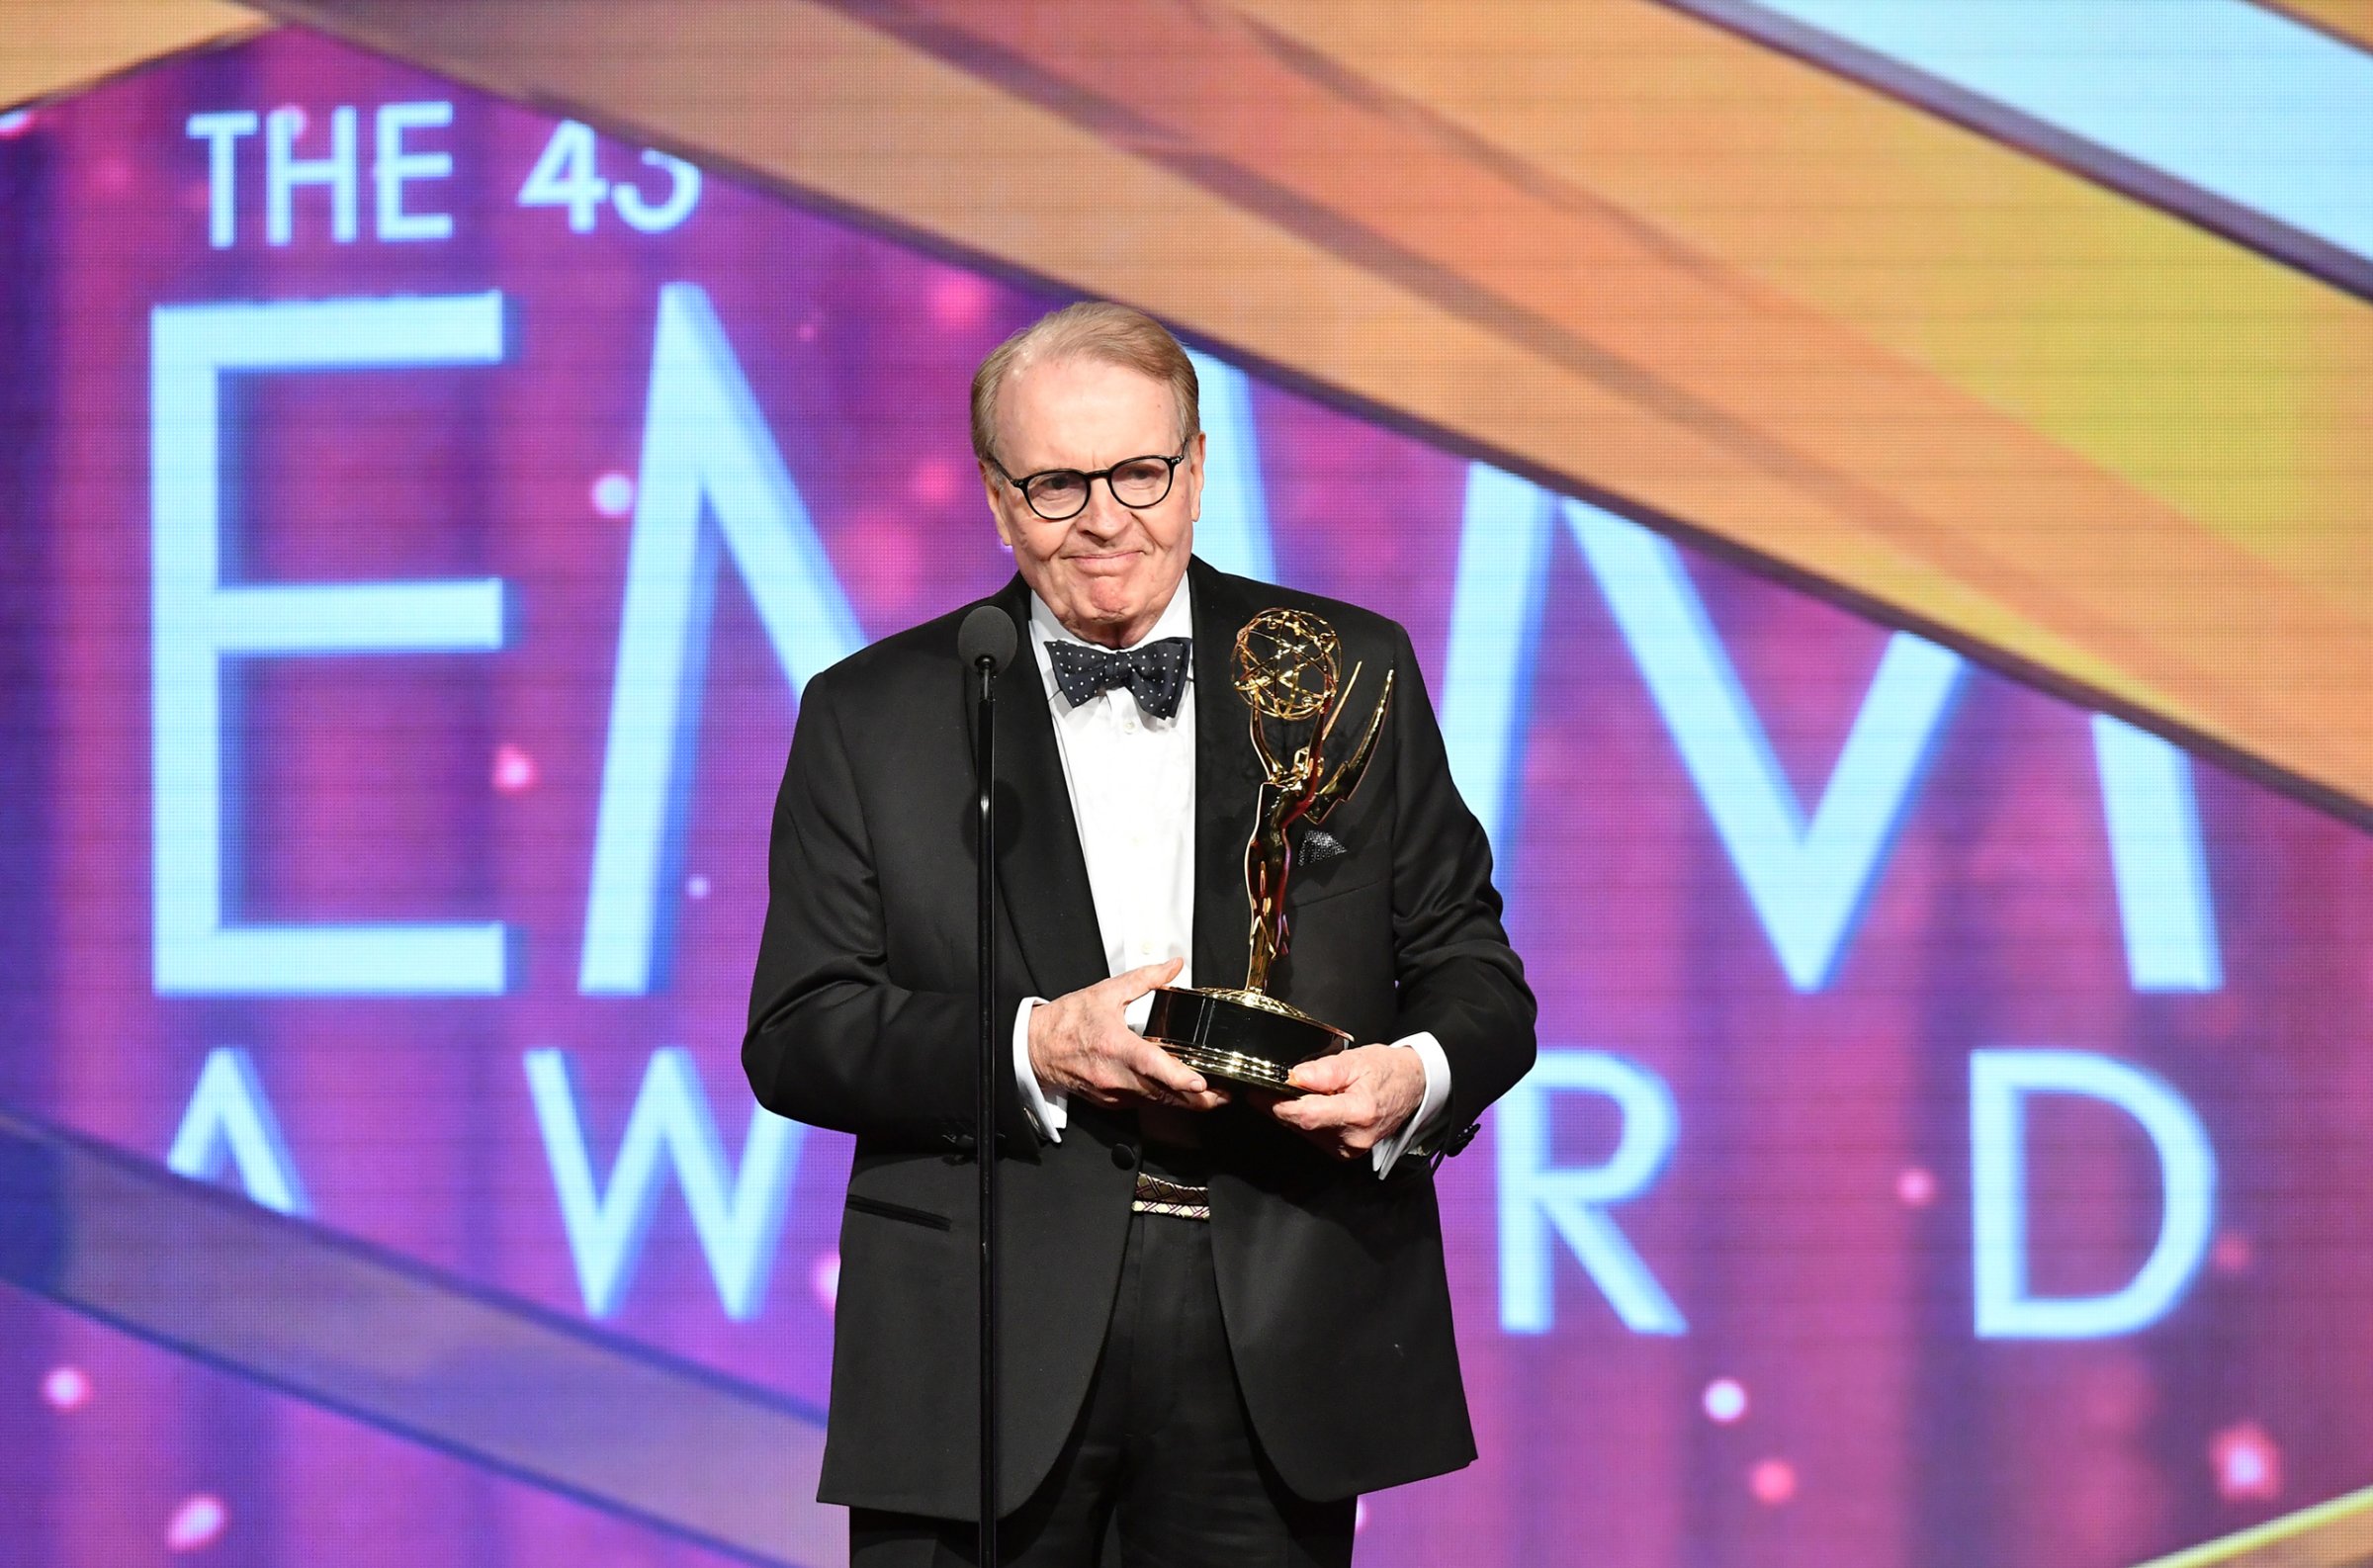 LOS ANGELES, CA - MAY 01: Charles Osgood speaks onstage after receiving the Emmy for Outstanding Morning Program at the 43rd Annual Daytime Emmy Awards at the Westin Bonaventure Hotel on May 1, 2016 in Los Angeles, California. (Photo by Earl Gibson III/Getty Images)